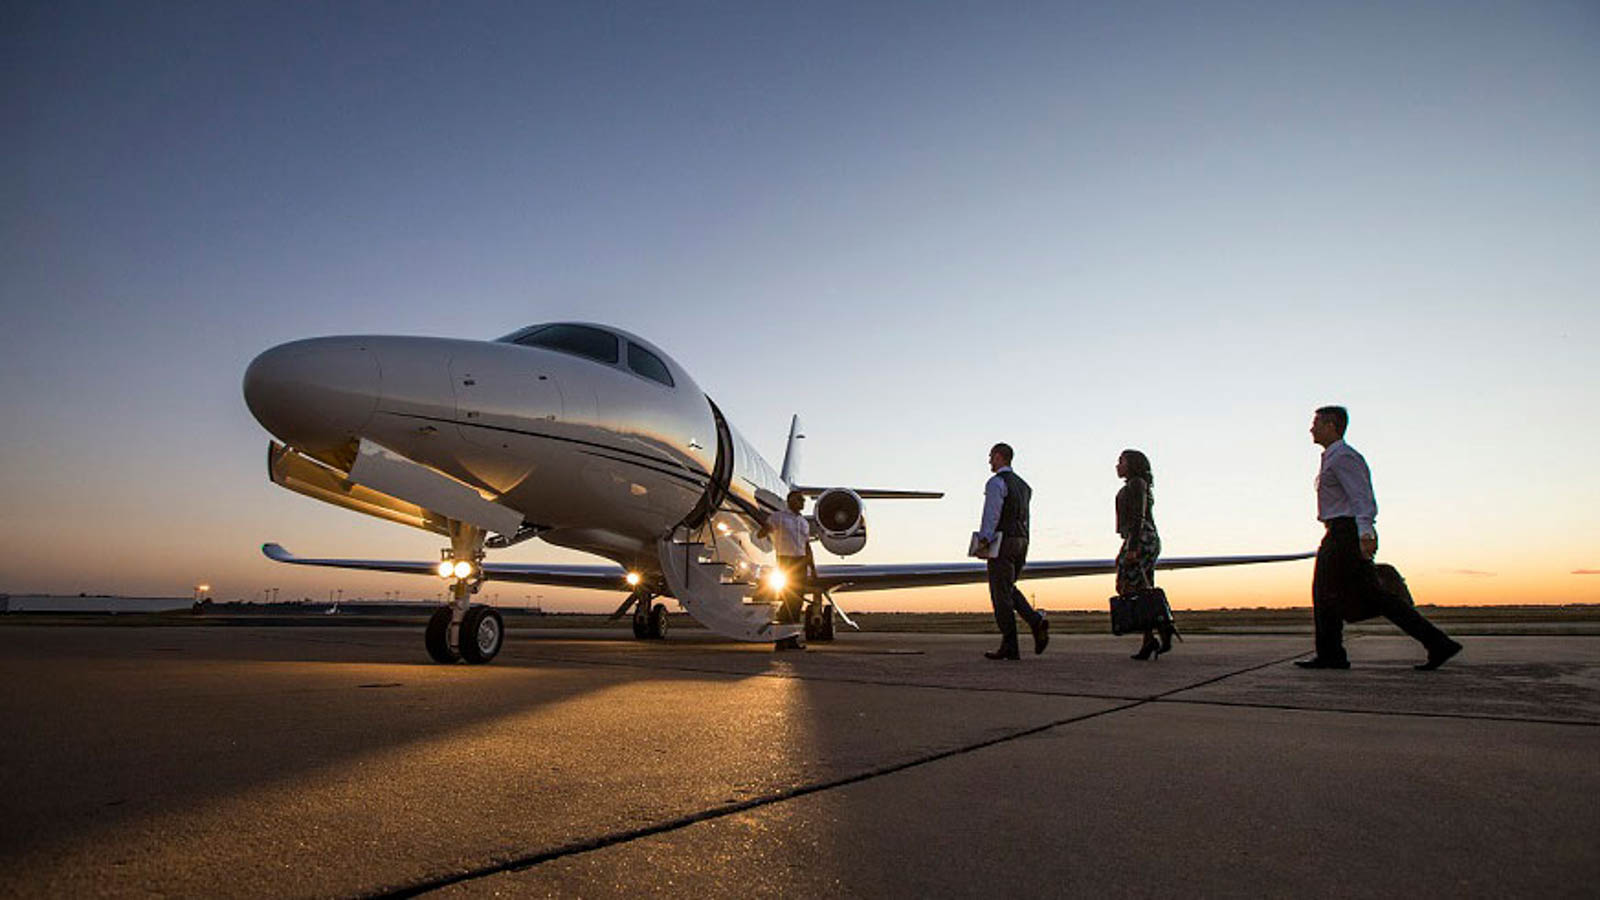 Benefits of chartering a private jet l Hong Kong l Gafencu Magazine